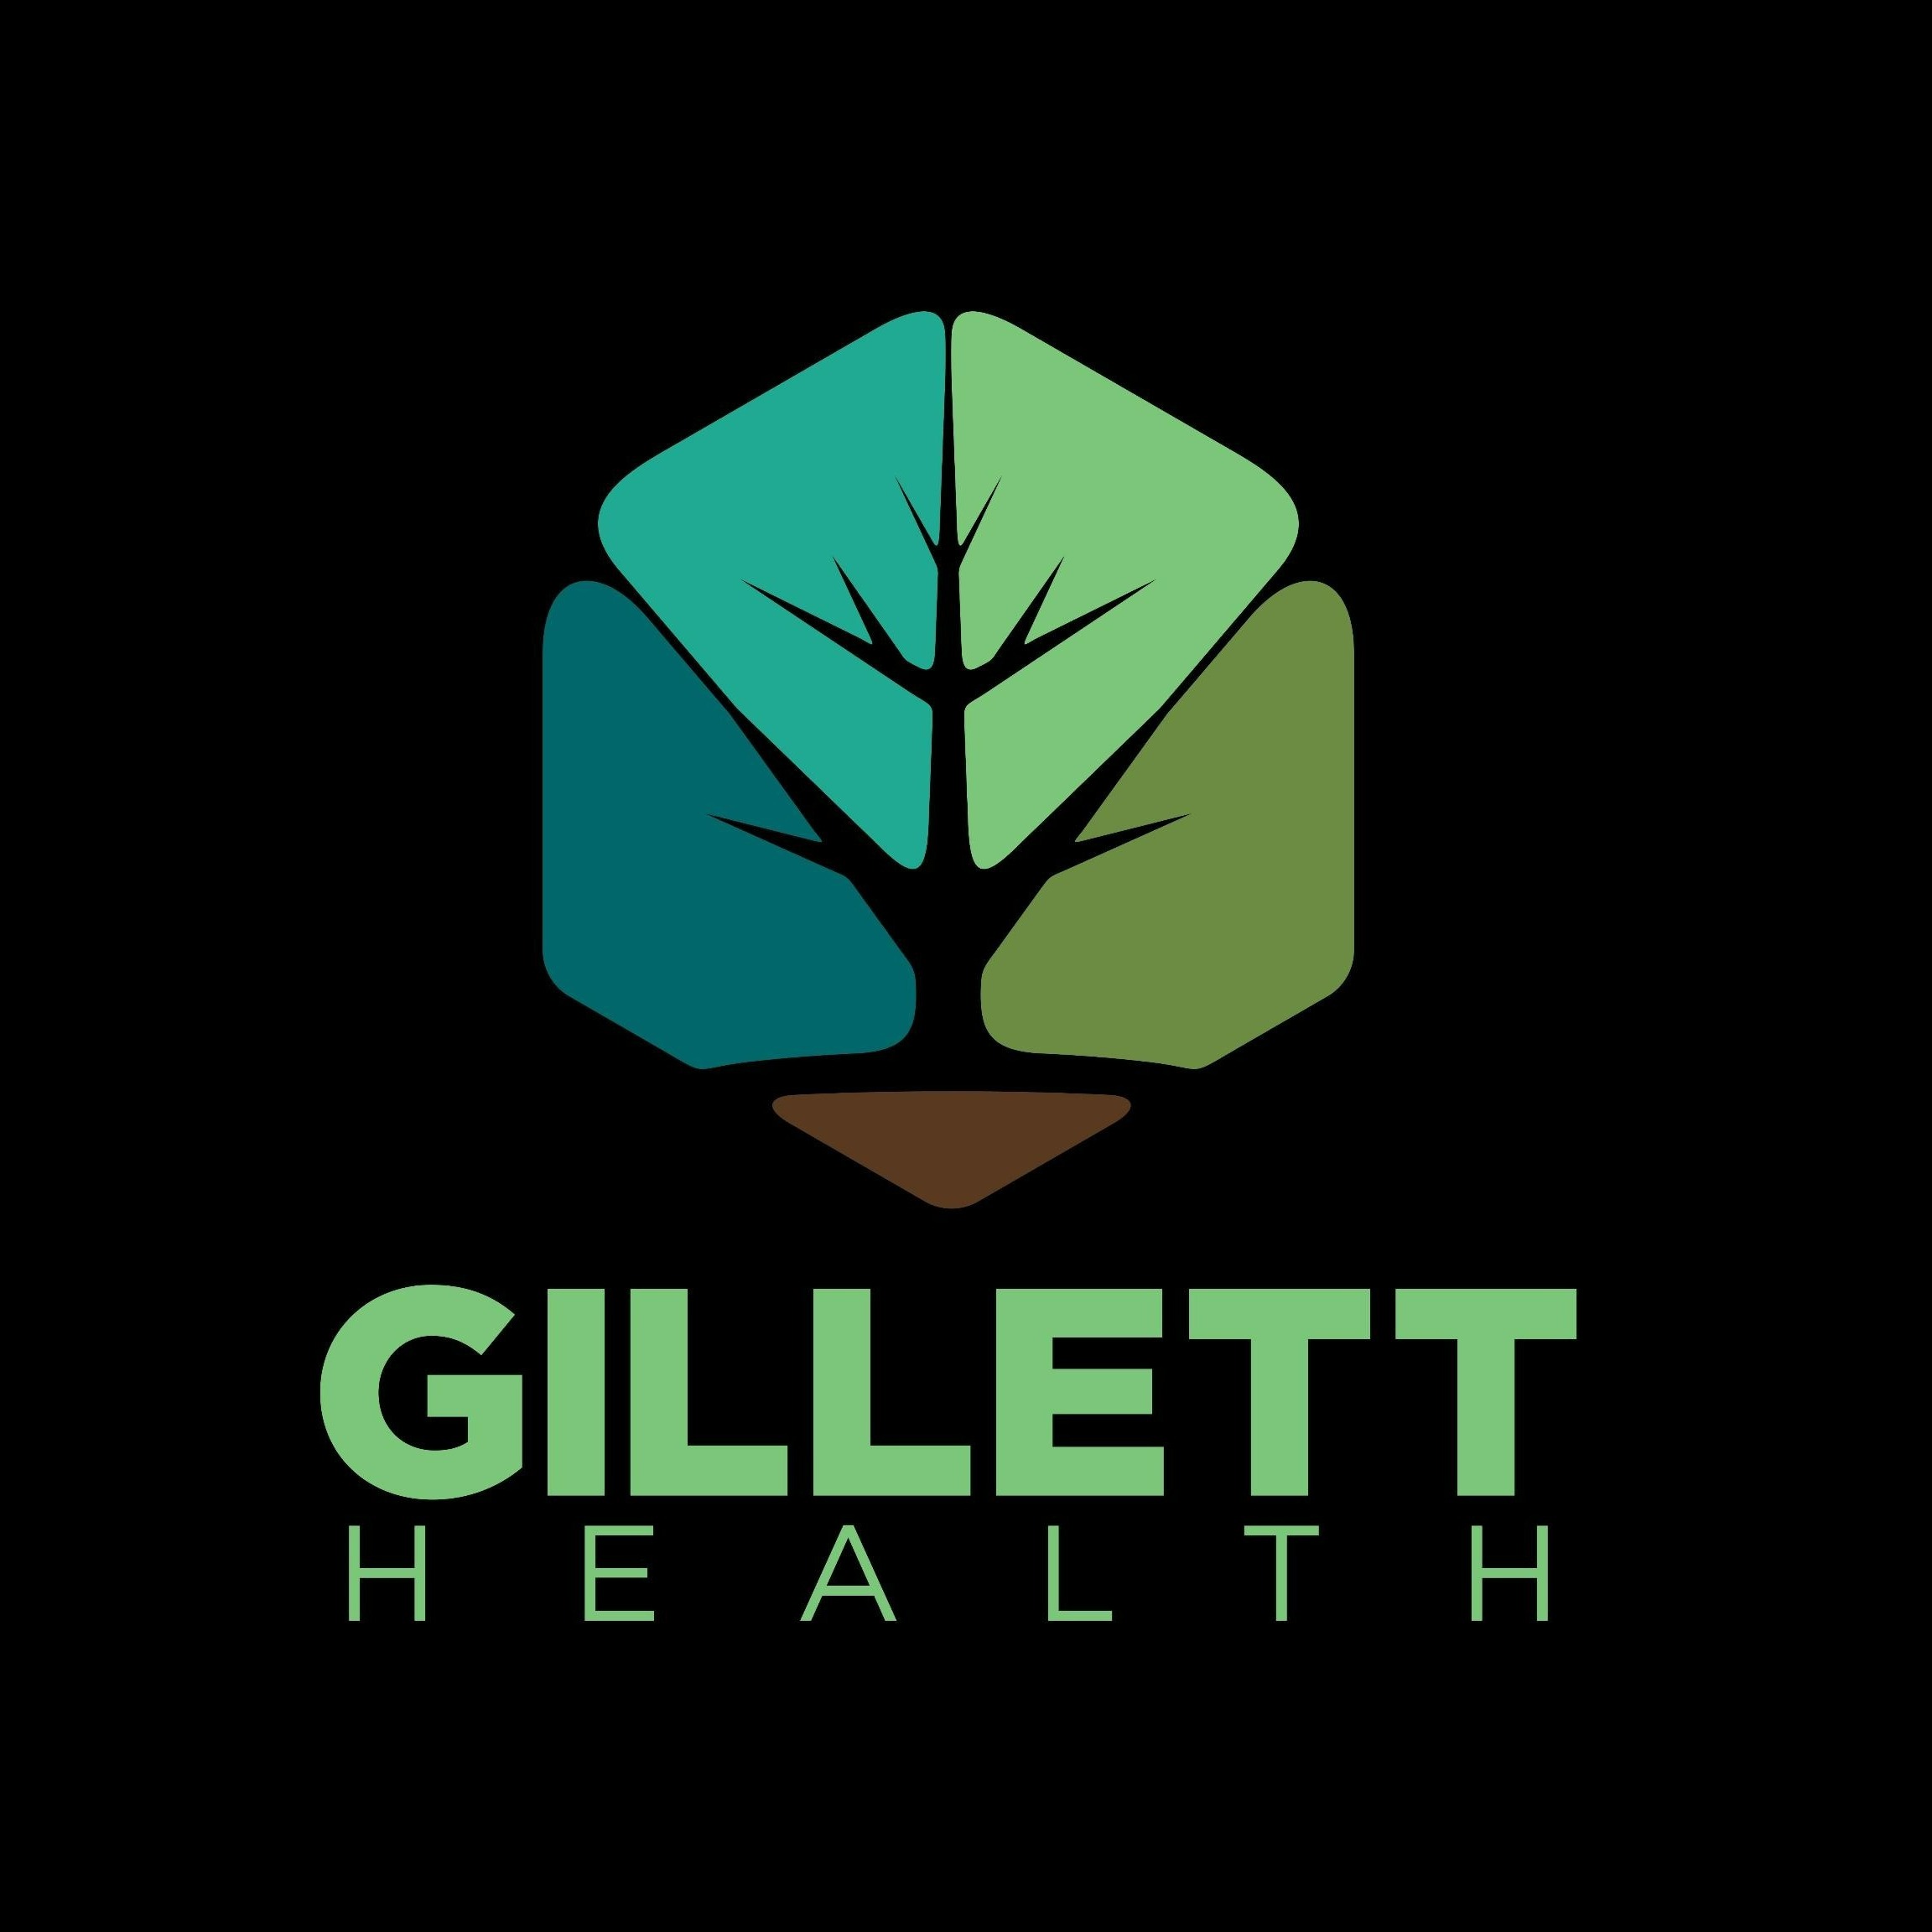 Everything You Need To Know About Herpes | The Gillet health Podcast #64